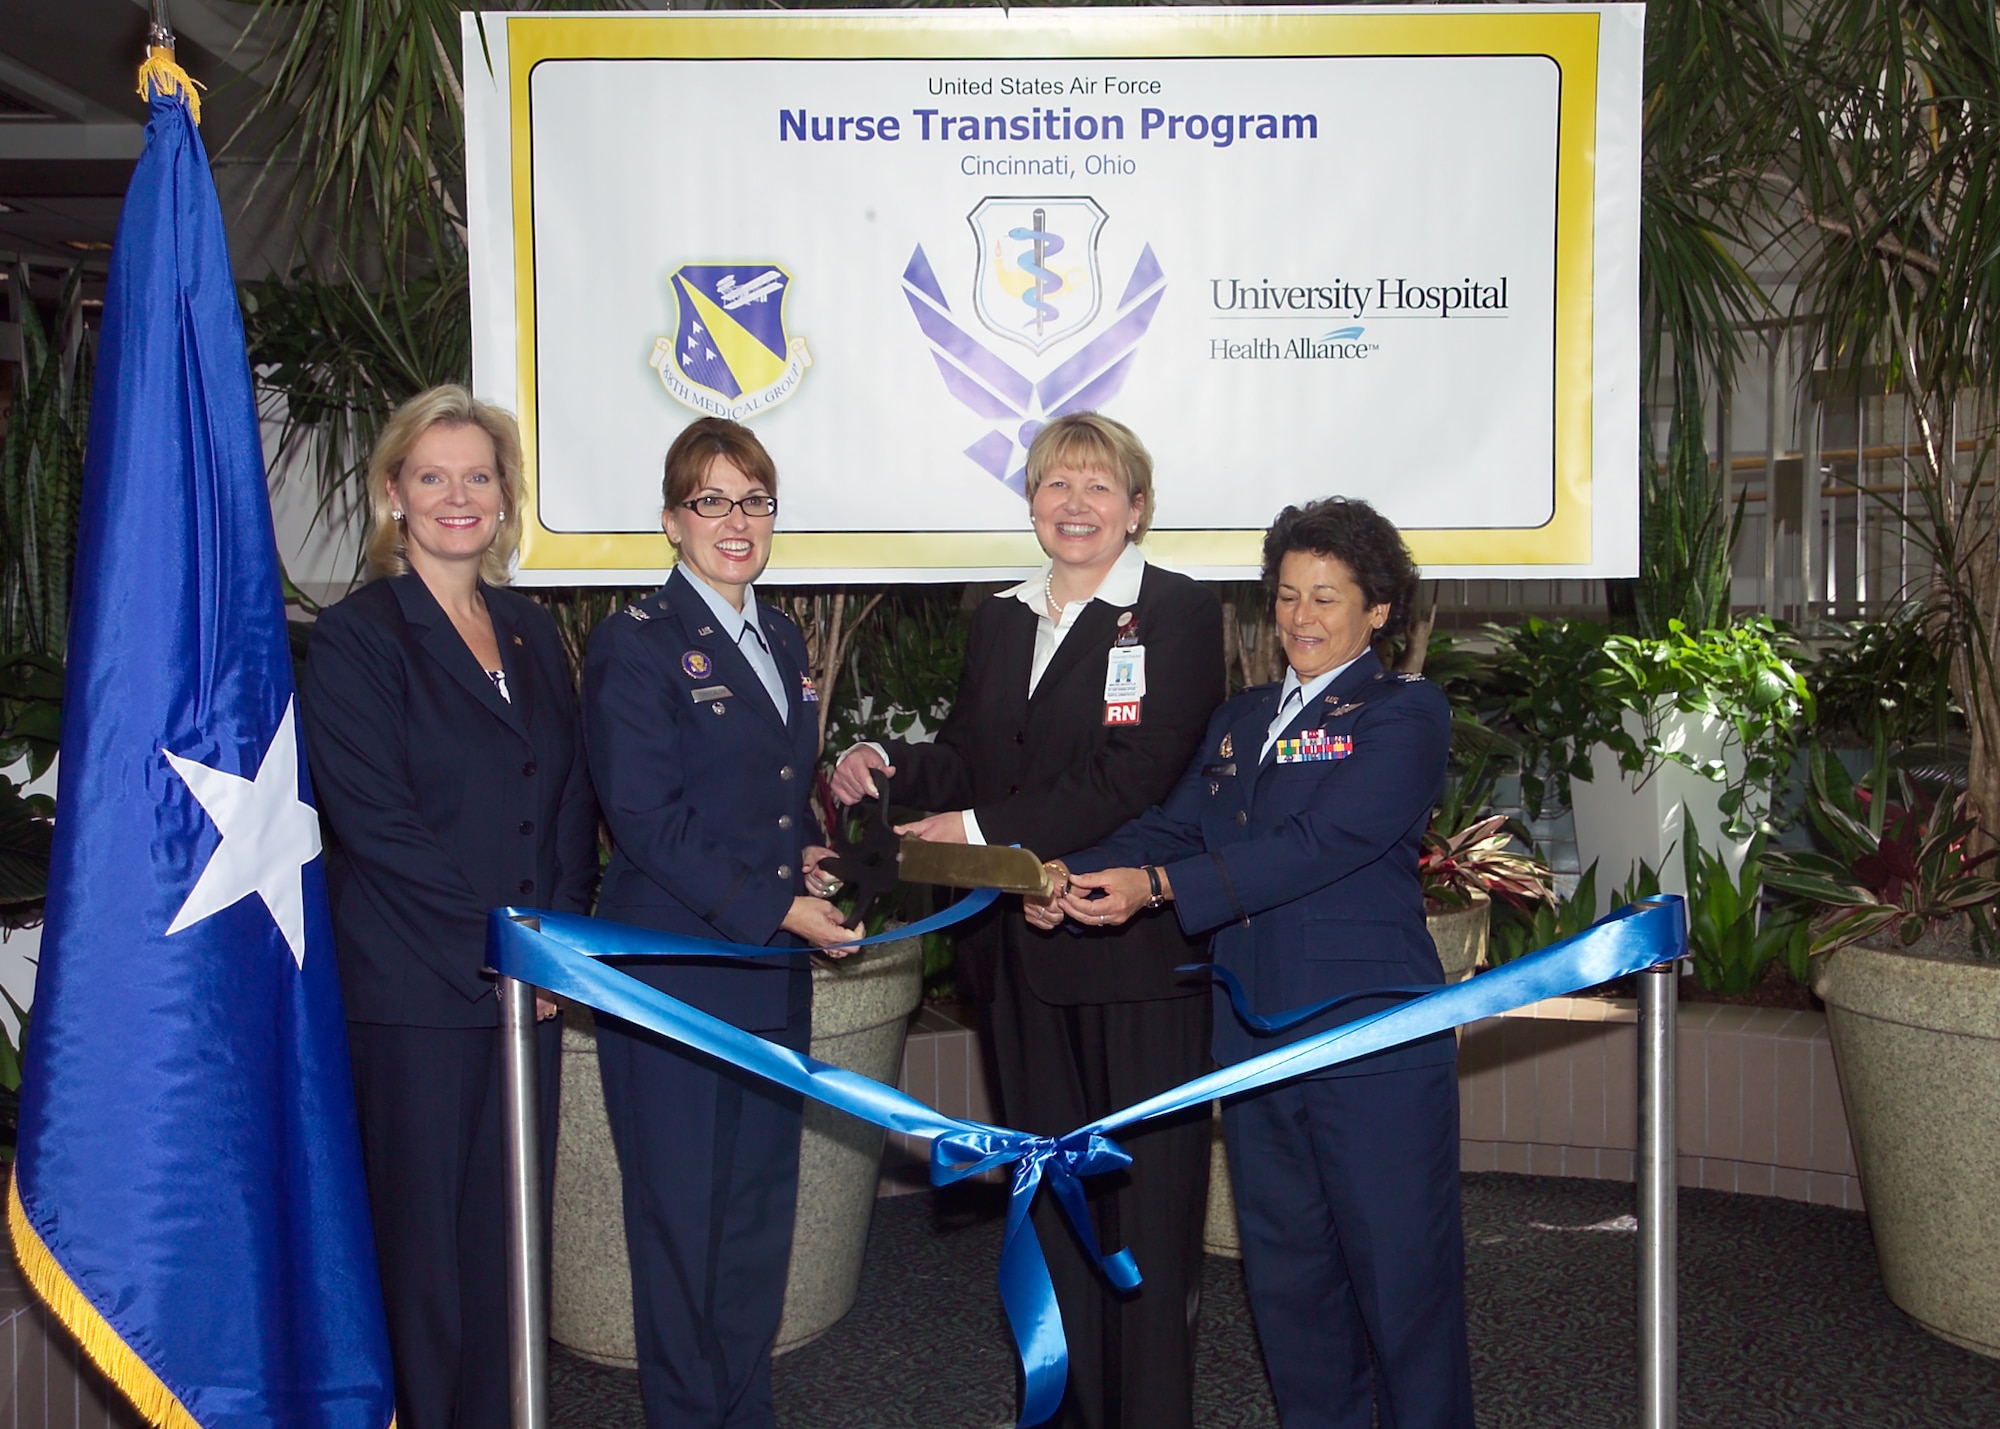 University Hospital Cincinnati and the U.S. Air Force inaugurated the Nurse Transition Program Oct. 7 to provide newly graduated registered nurses advanced clinical and deployment readiness training for service in the Air Force Nurse Corps. Cutting the ribbon are (L-R) : Lee Ann Liska, Executive Director & Senior Vice President, UH-Cincinnati; Col. Kimberly Siniscalchi, Assistant Air Force Surgeon General, Medical Force Development, and Assistant Air Force Surgeon General, Nursing Services;  Mavis Bechhtle, Chief Nursing Officer; and Col. Linda Kisner, Chief of Education and Training Division and Director of Air Force Nursing Services. (U.S. Air Force photo)